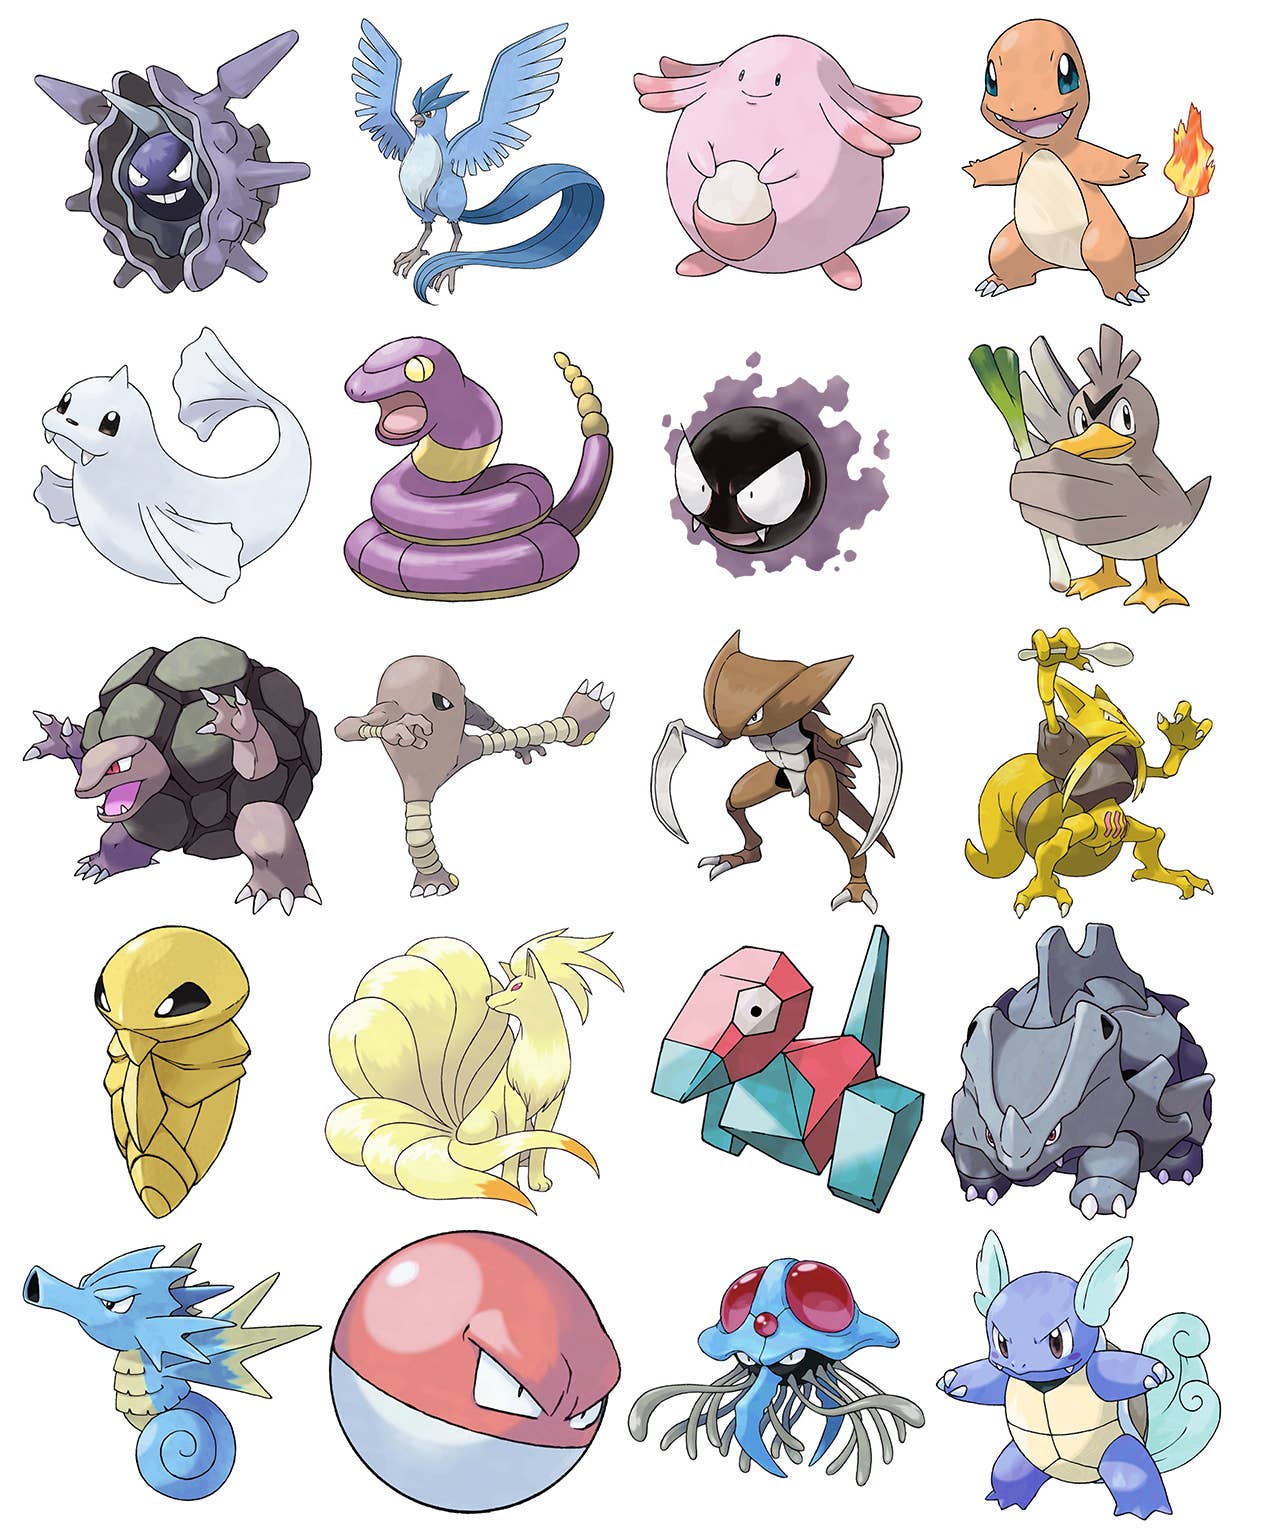 Have any of you tried to name all the Pokémon in this quiz at